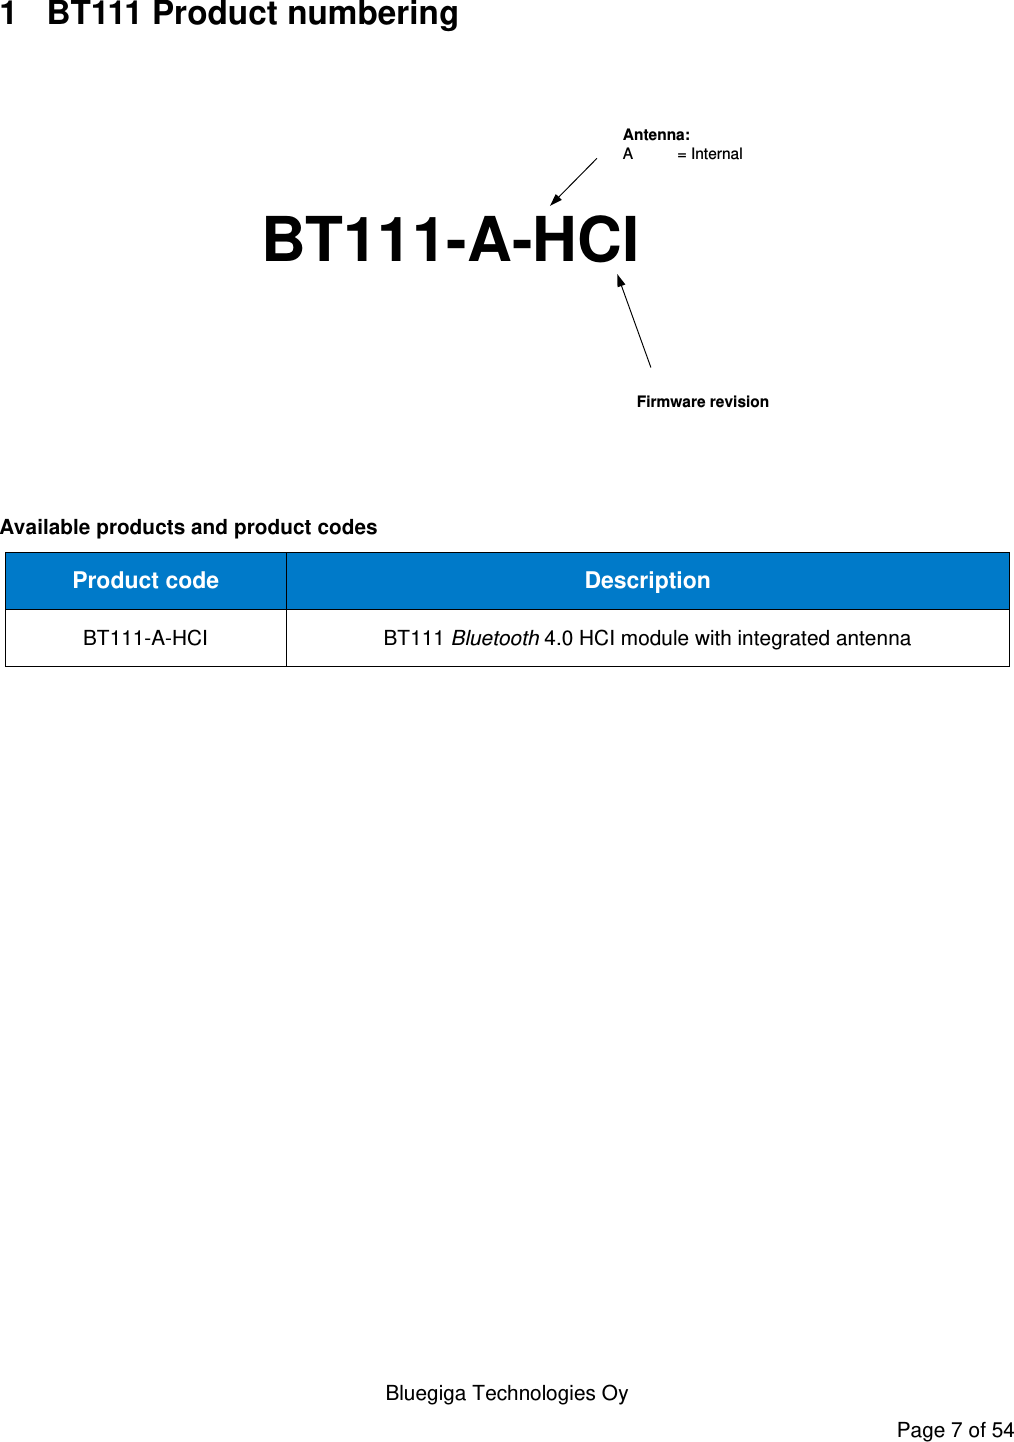    Bluegiga Technologies Oy Page 7 of 54 1  BT111 Product numbering BT111-A-HCI             Firmware revisionAntenna:A  = Internal Available products and product codes Product code Description BT111-A-HCI BT111 Bluetooth 4.0 HCI module with integrated antenna   